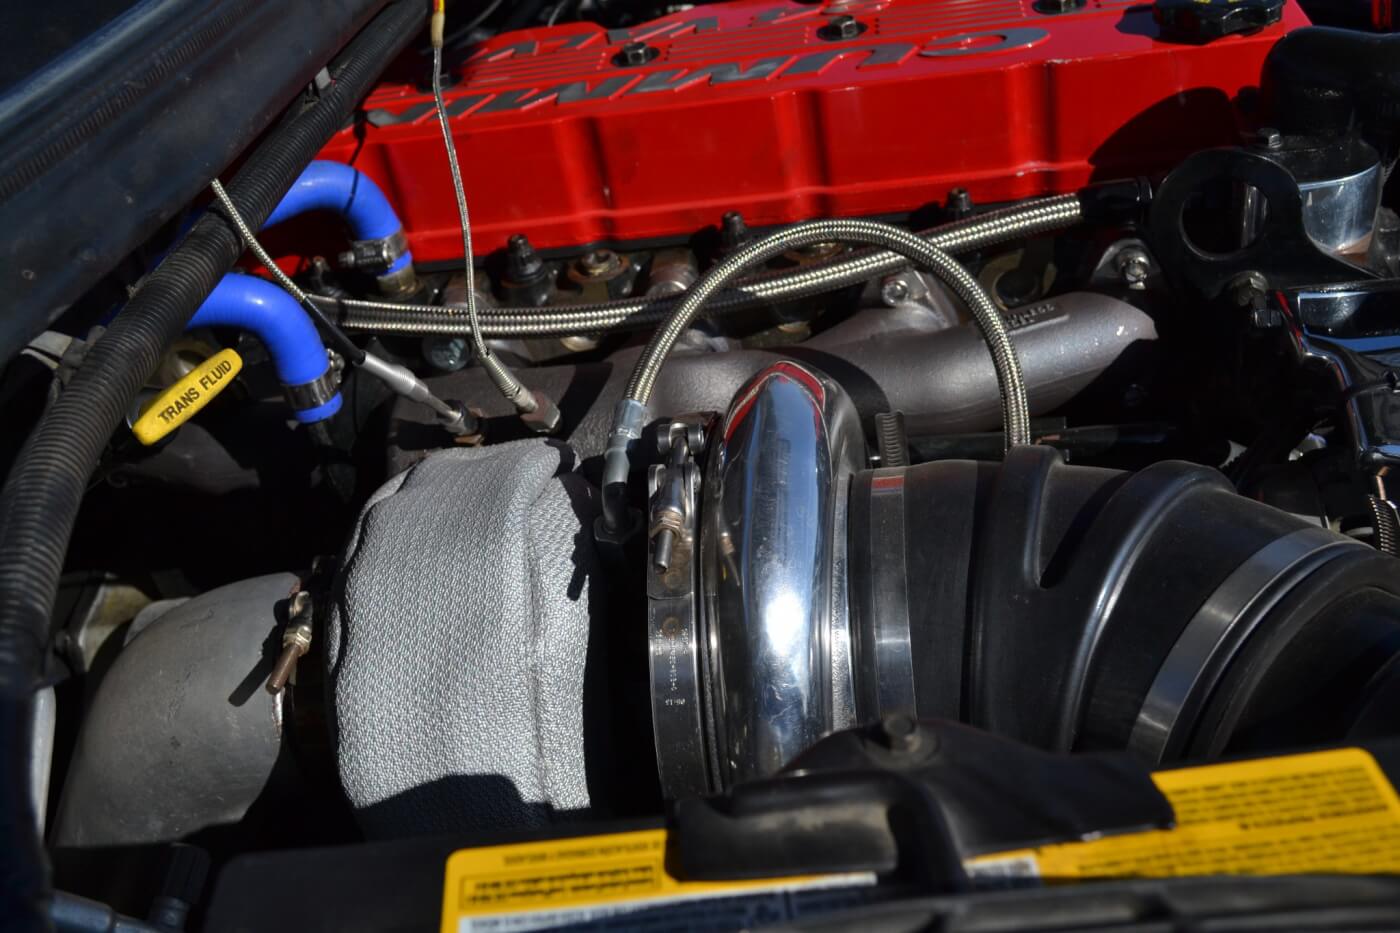 A single 67.7mm turbocharger from BorgWarner is responsible for making more than 60psi of boost. Exhaust exits via an HX40-style 4-inch downpipe, which connects to a 5-inch MBRP exhaust.